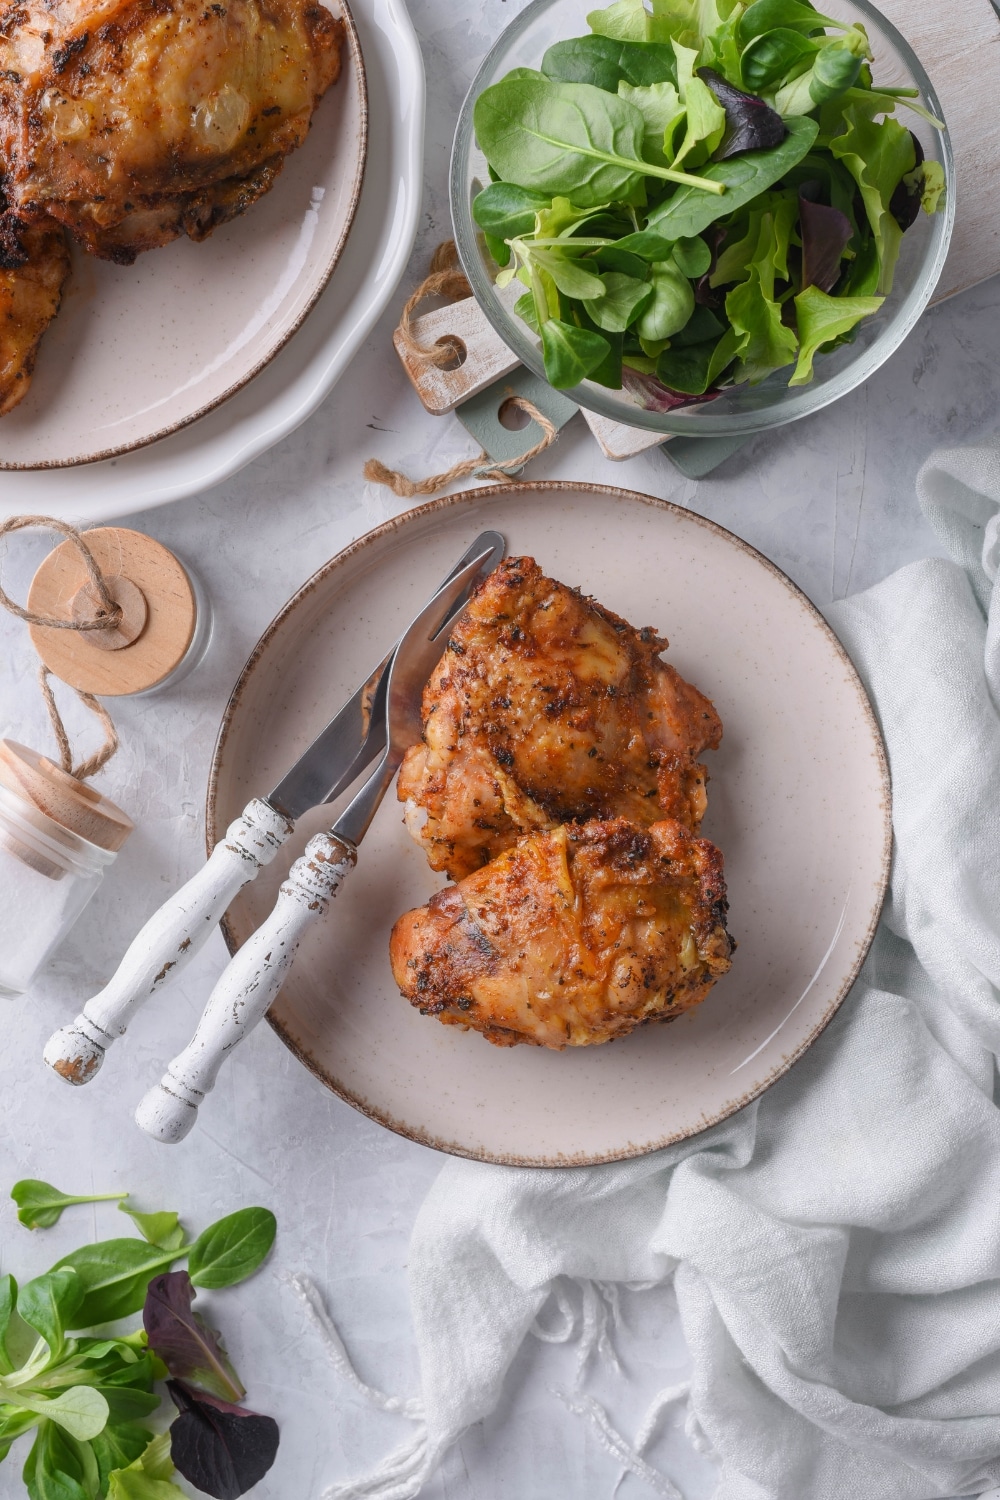 Air fryer chicken thighs on a plate with a knife and fork. Next to it are a bowl of salad and part of a plate of air fried chicken thighs.